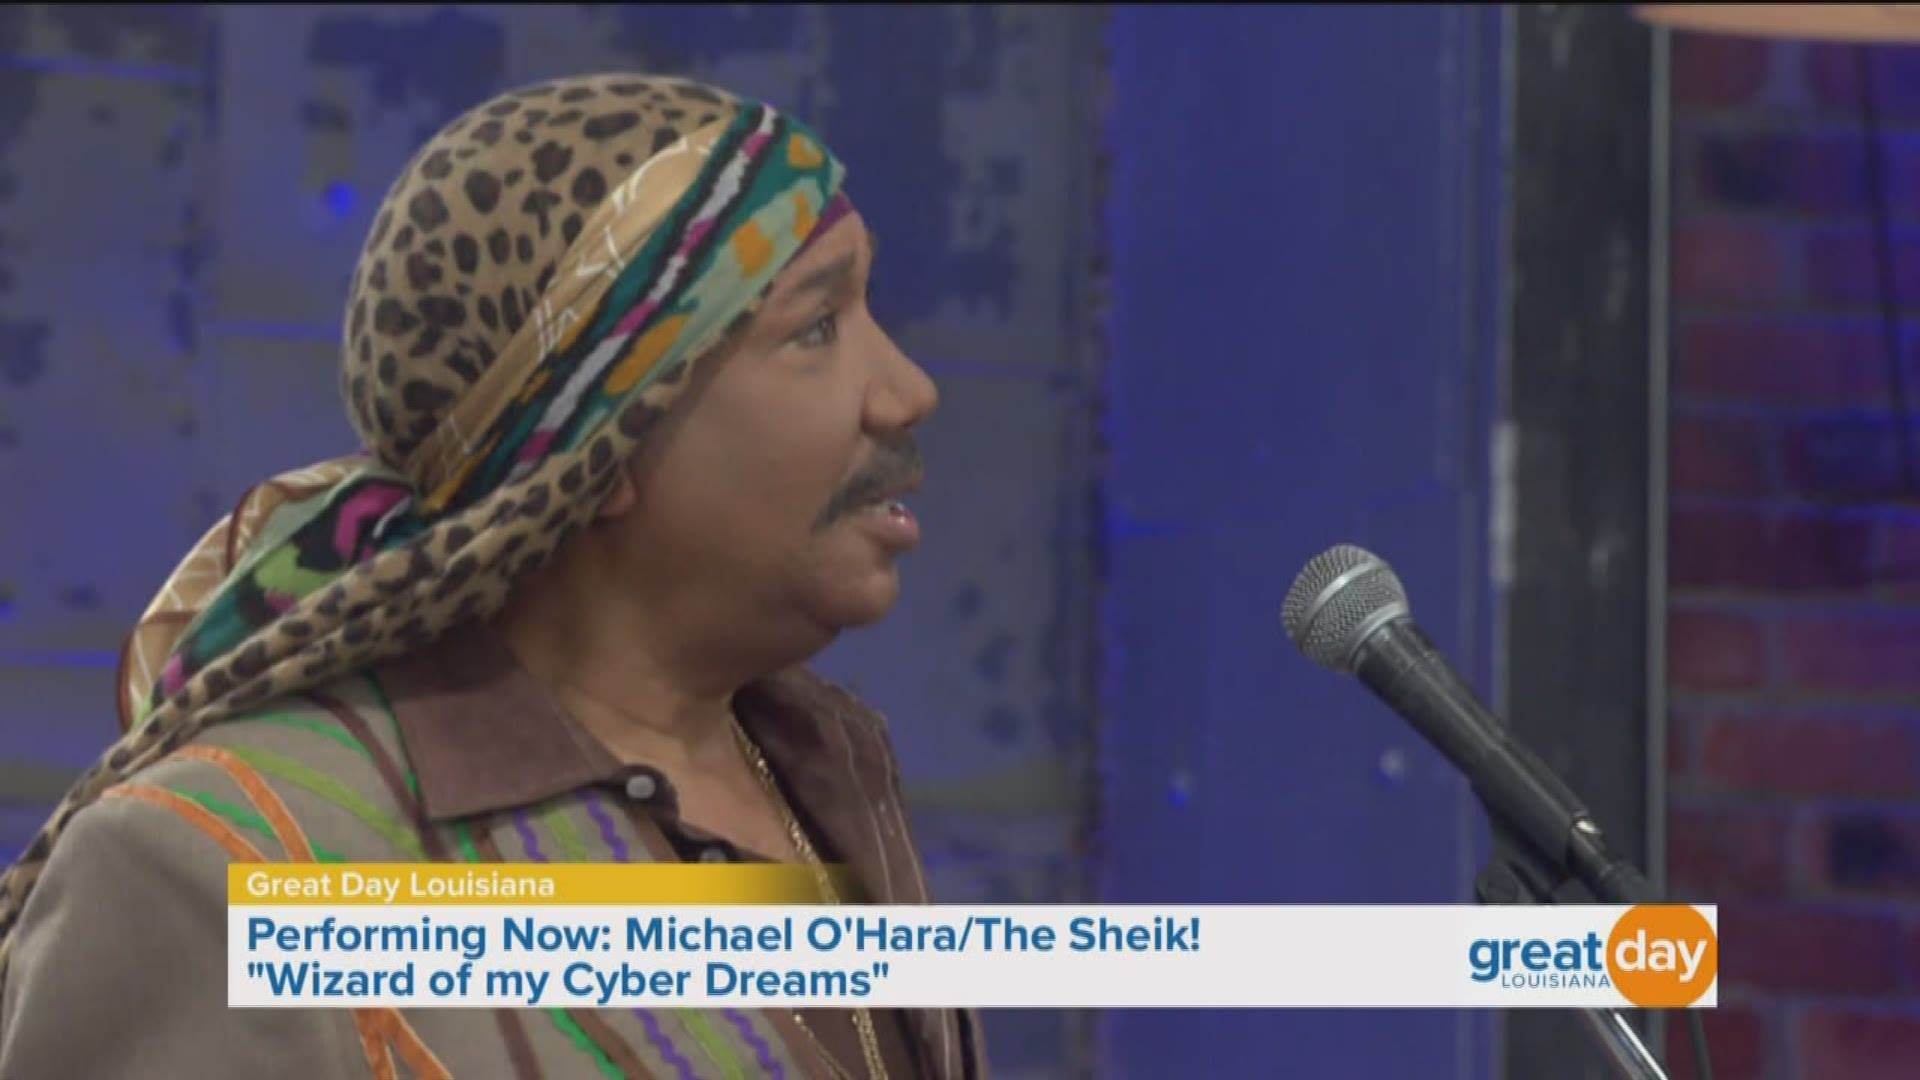 Michael O'Hara AKA The Sheik! performs "Wizard of my Cyber Dreams" from his new album.